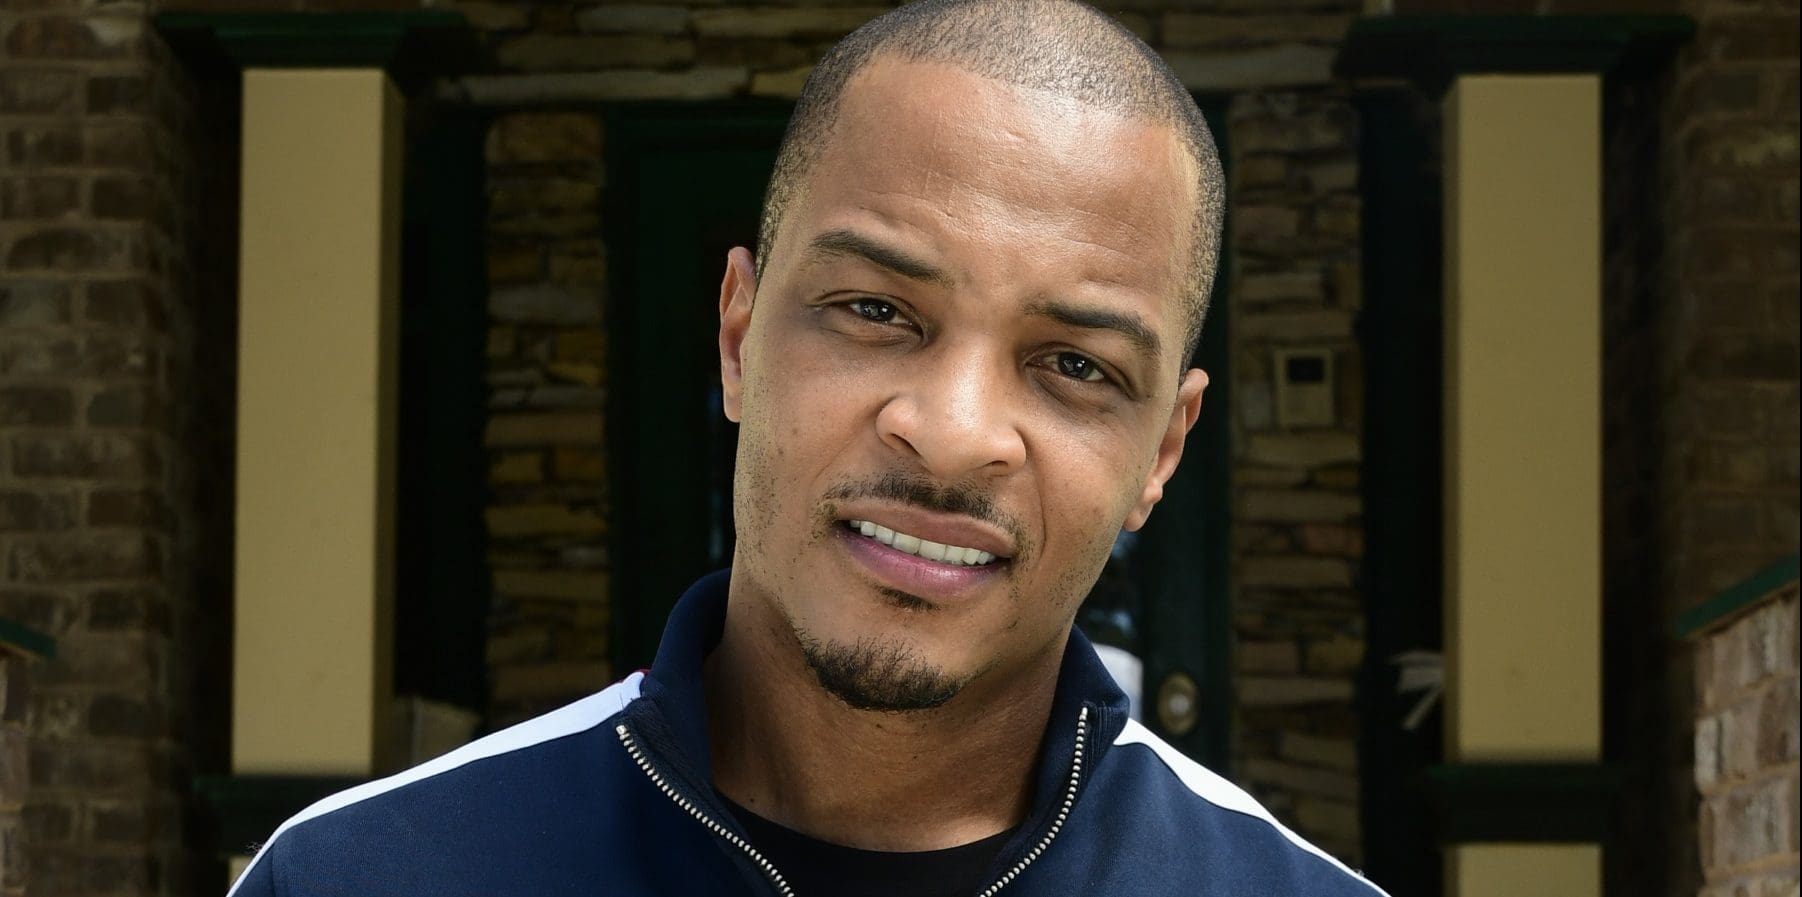 T.I. Sparks A Race-Related Debate On Social Media Following His Latest Post